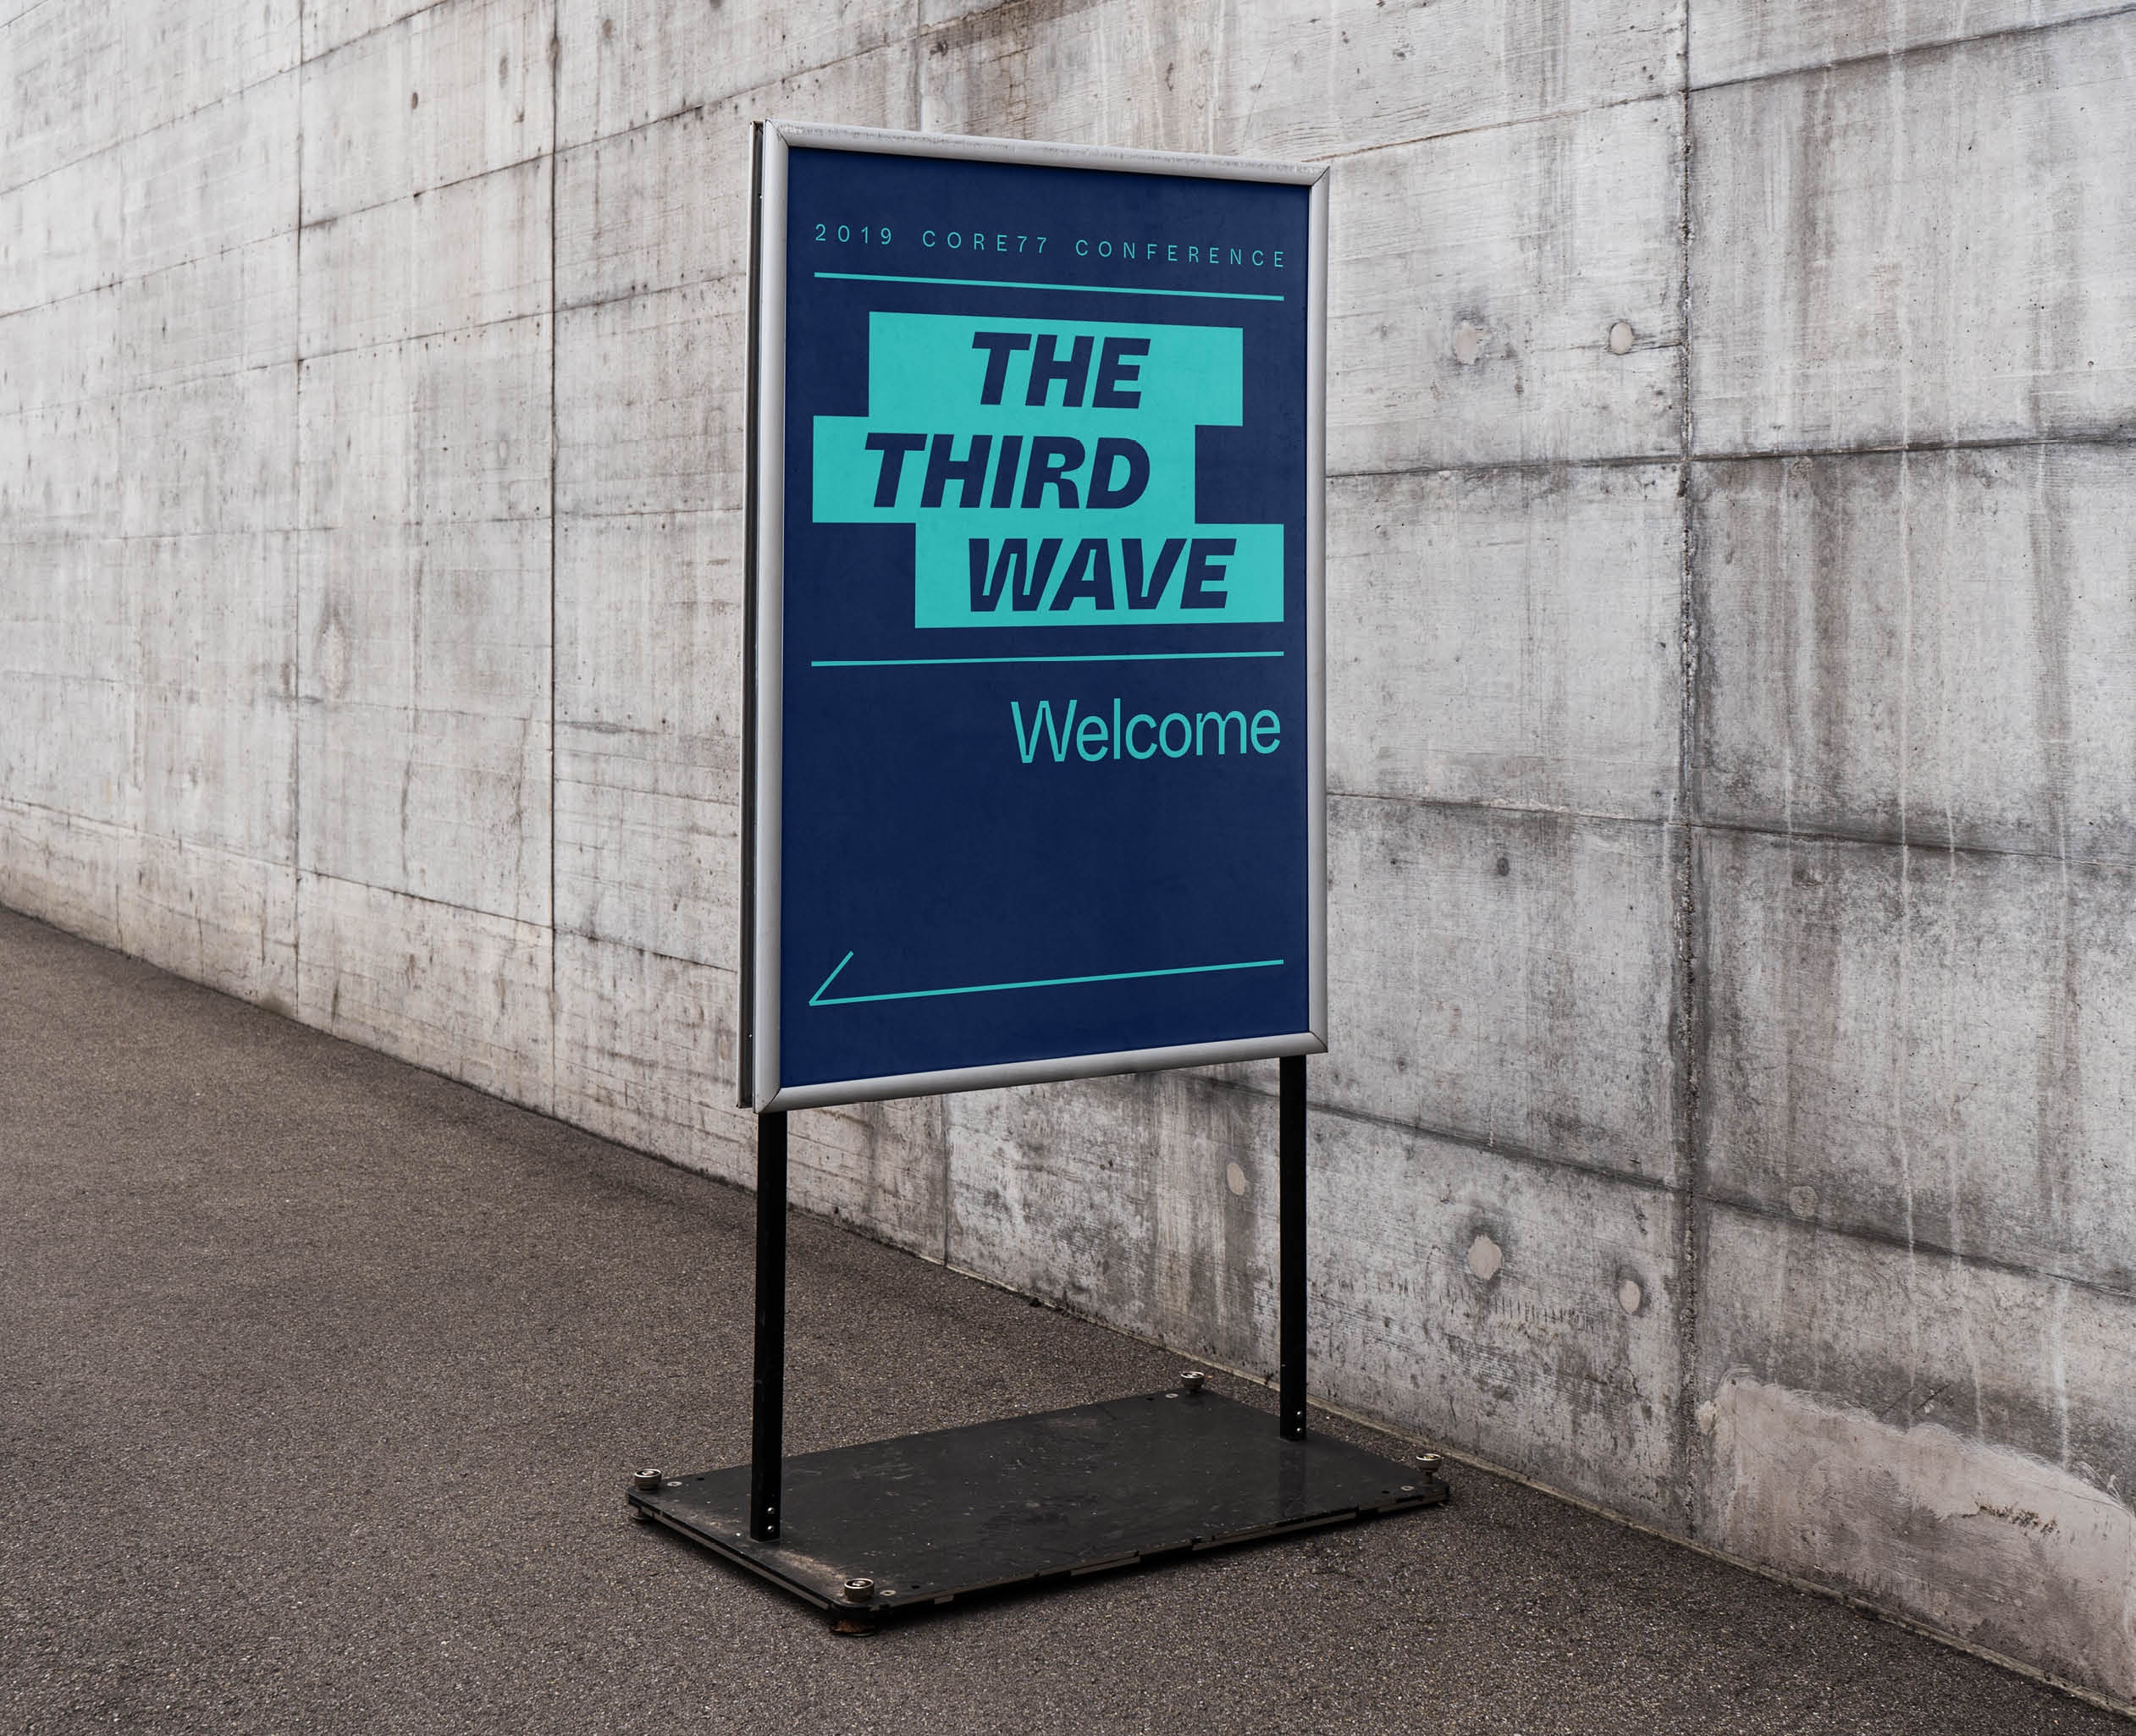 The Collected Works - Core77 The Third Wave - 08